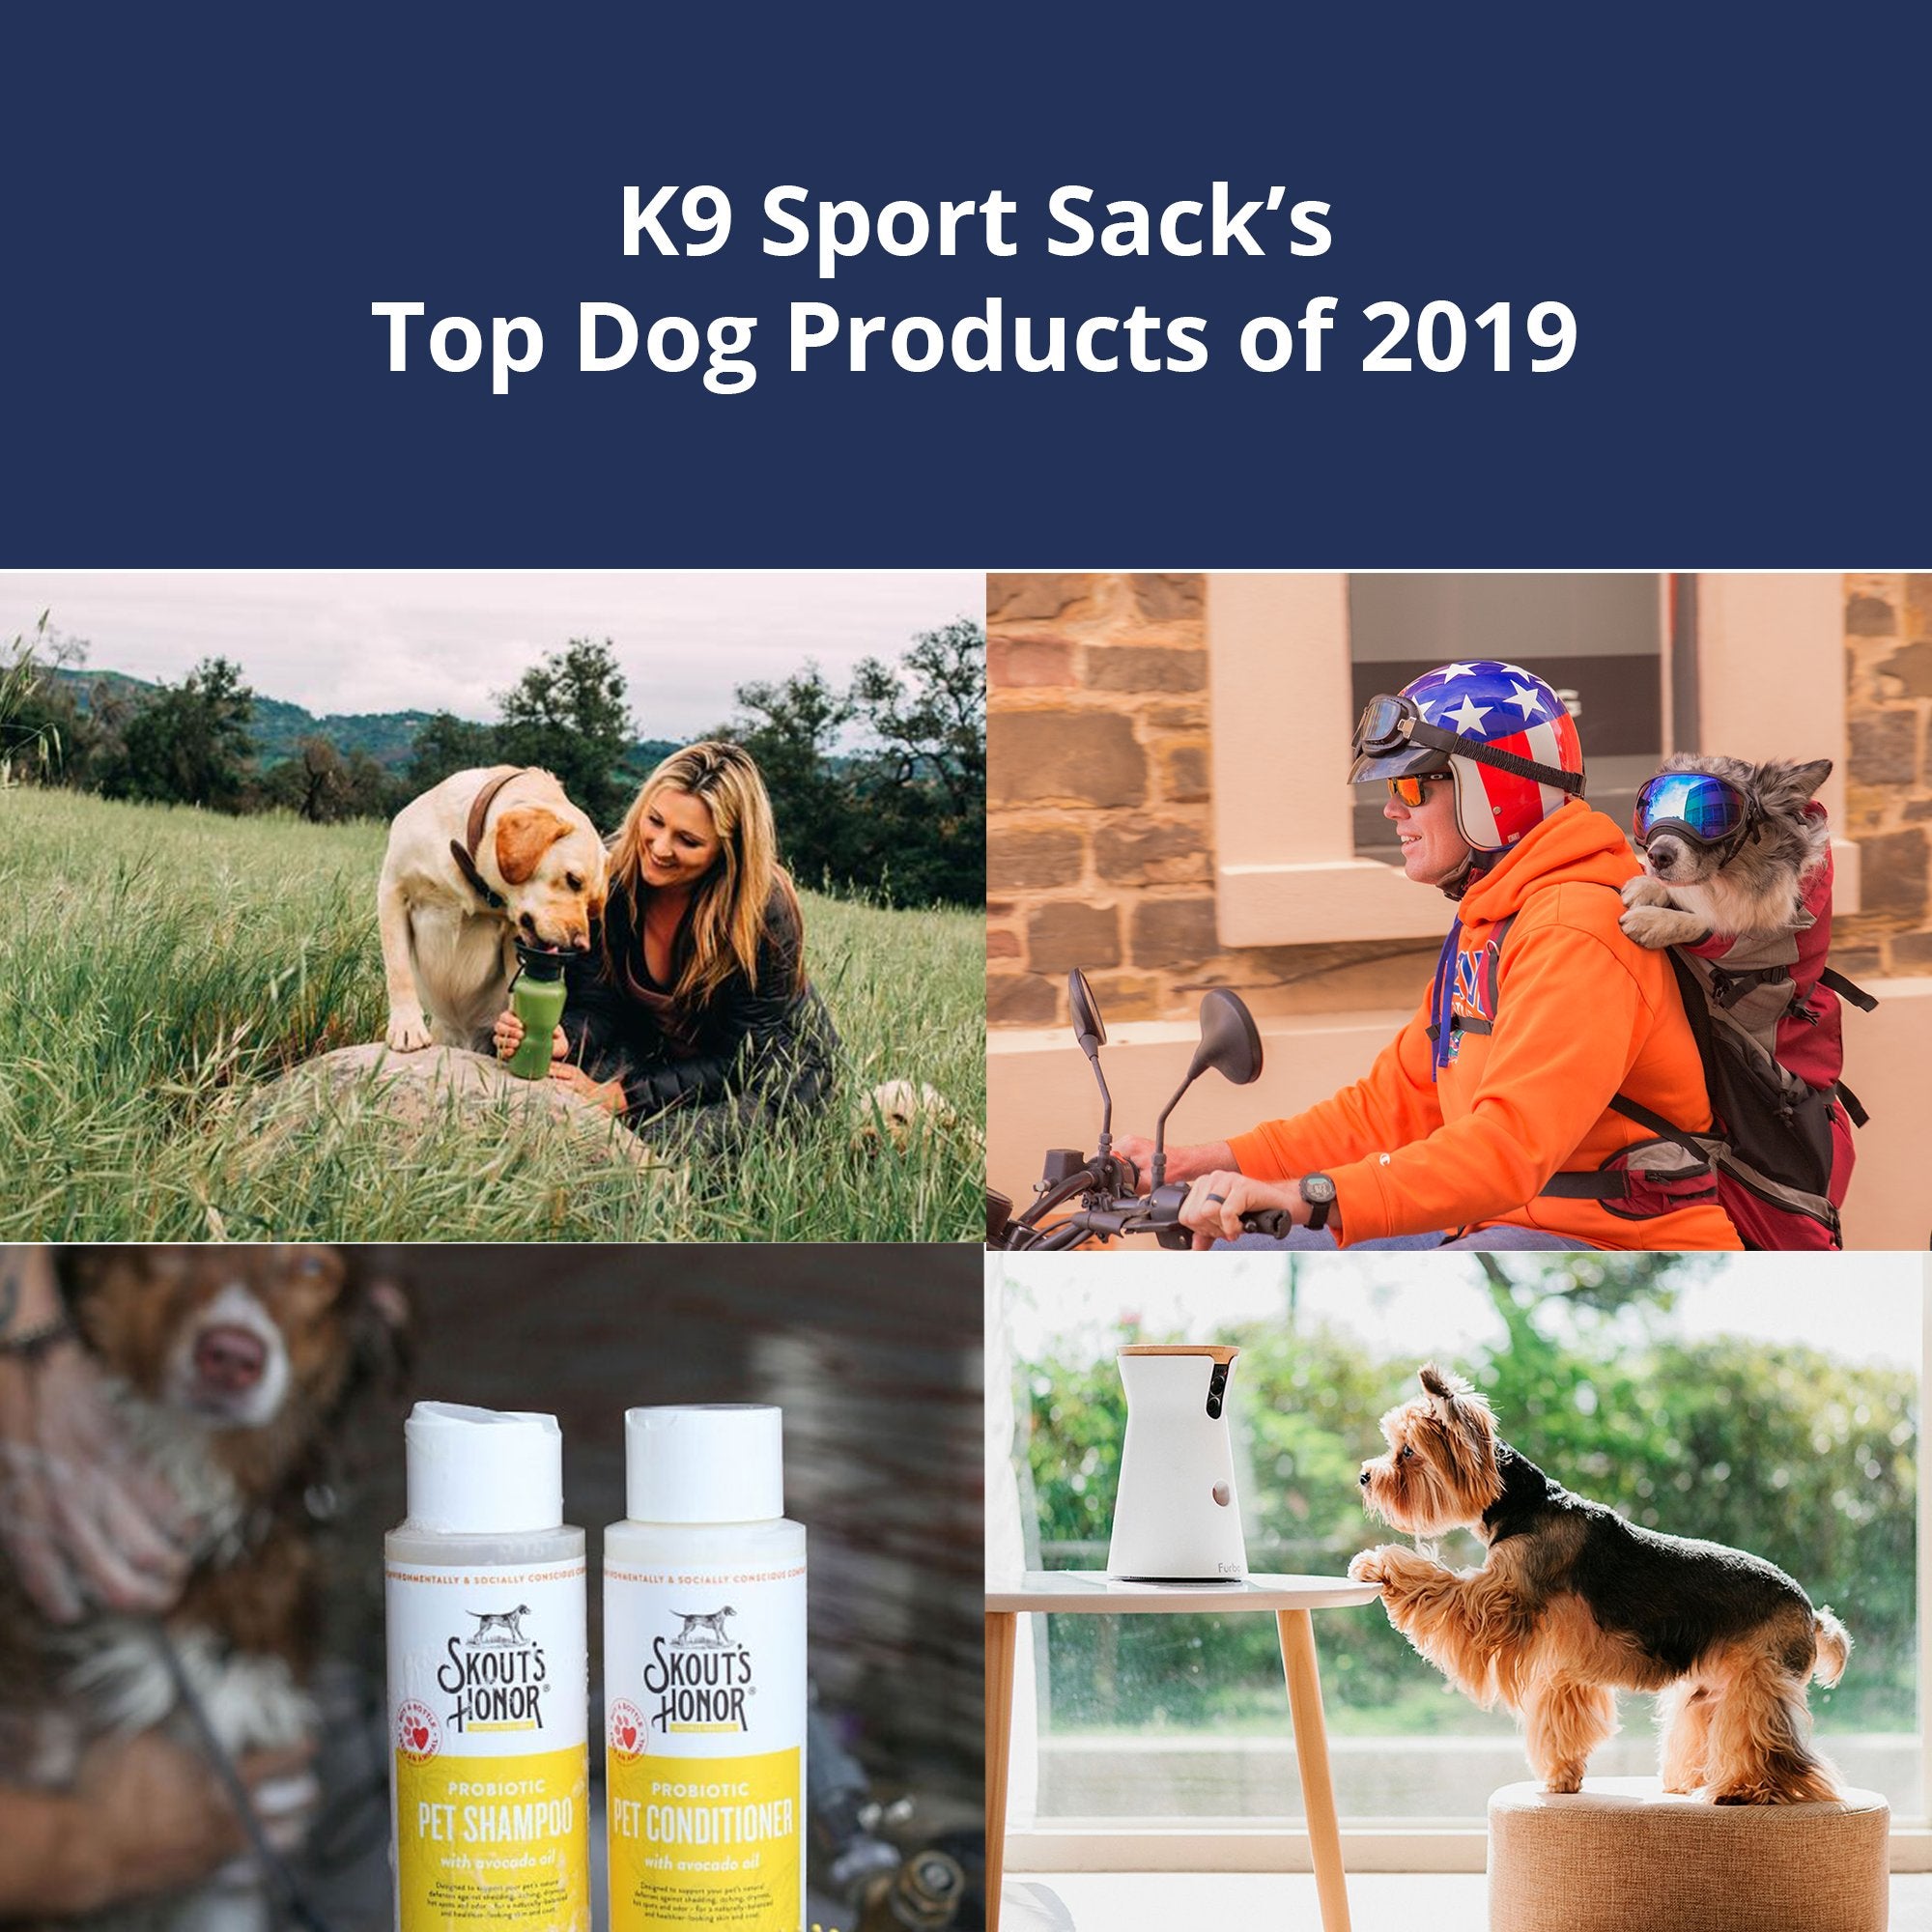 K9 Sport Sack's Top Dog Products of 2019